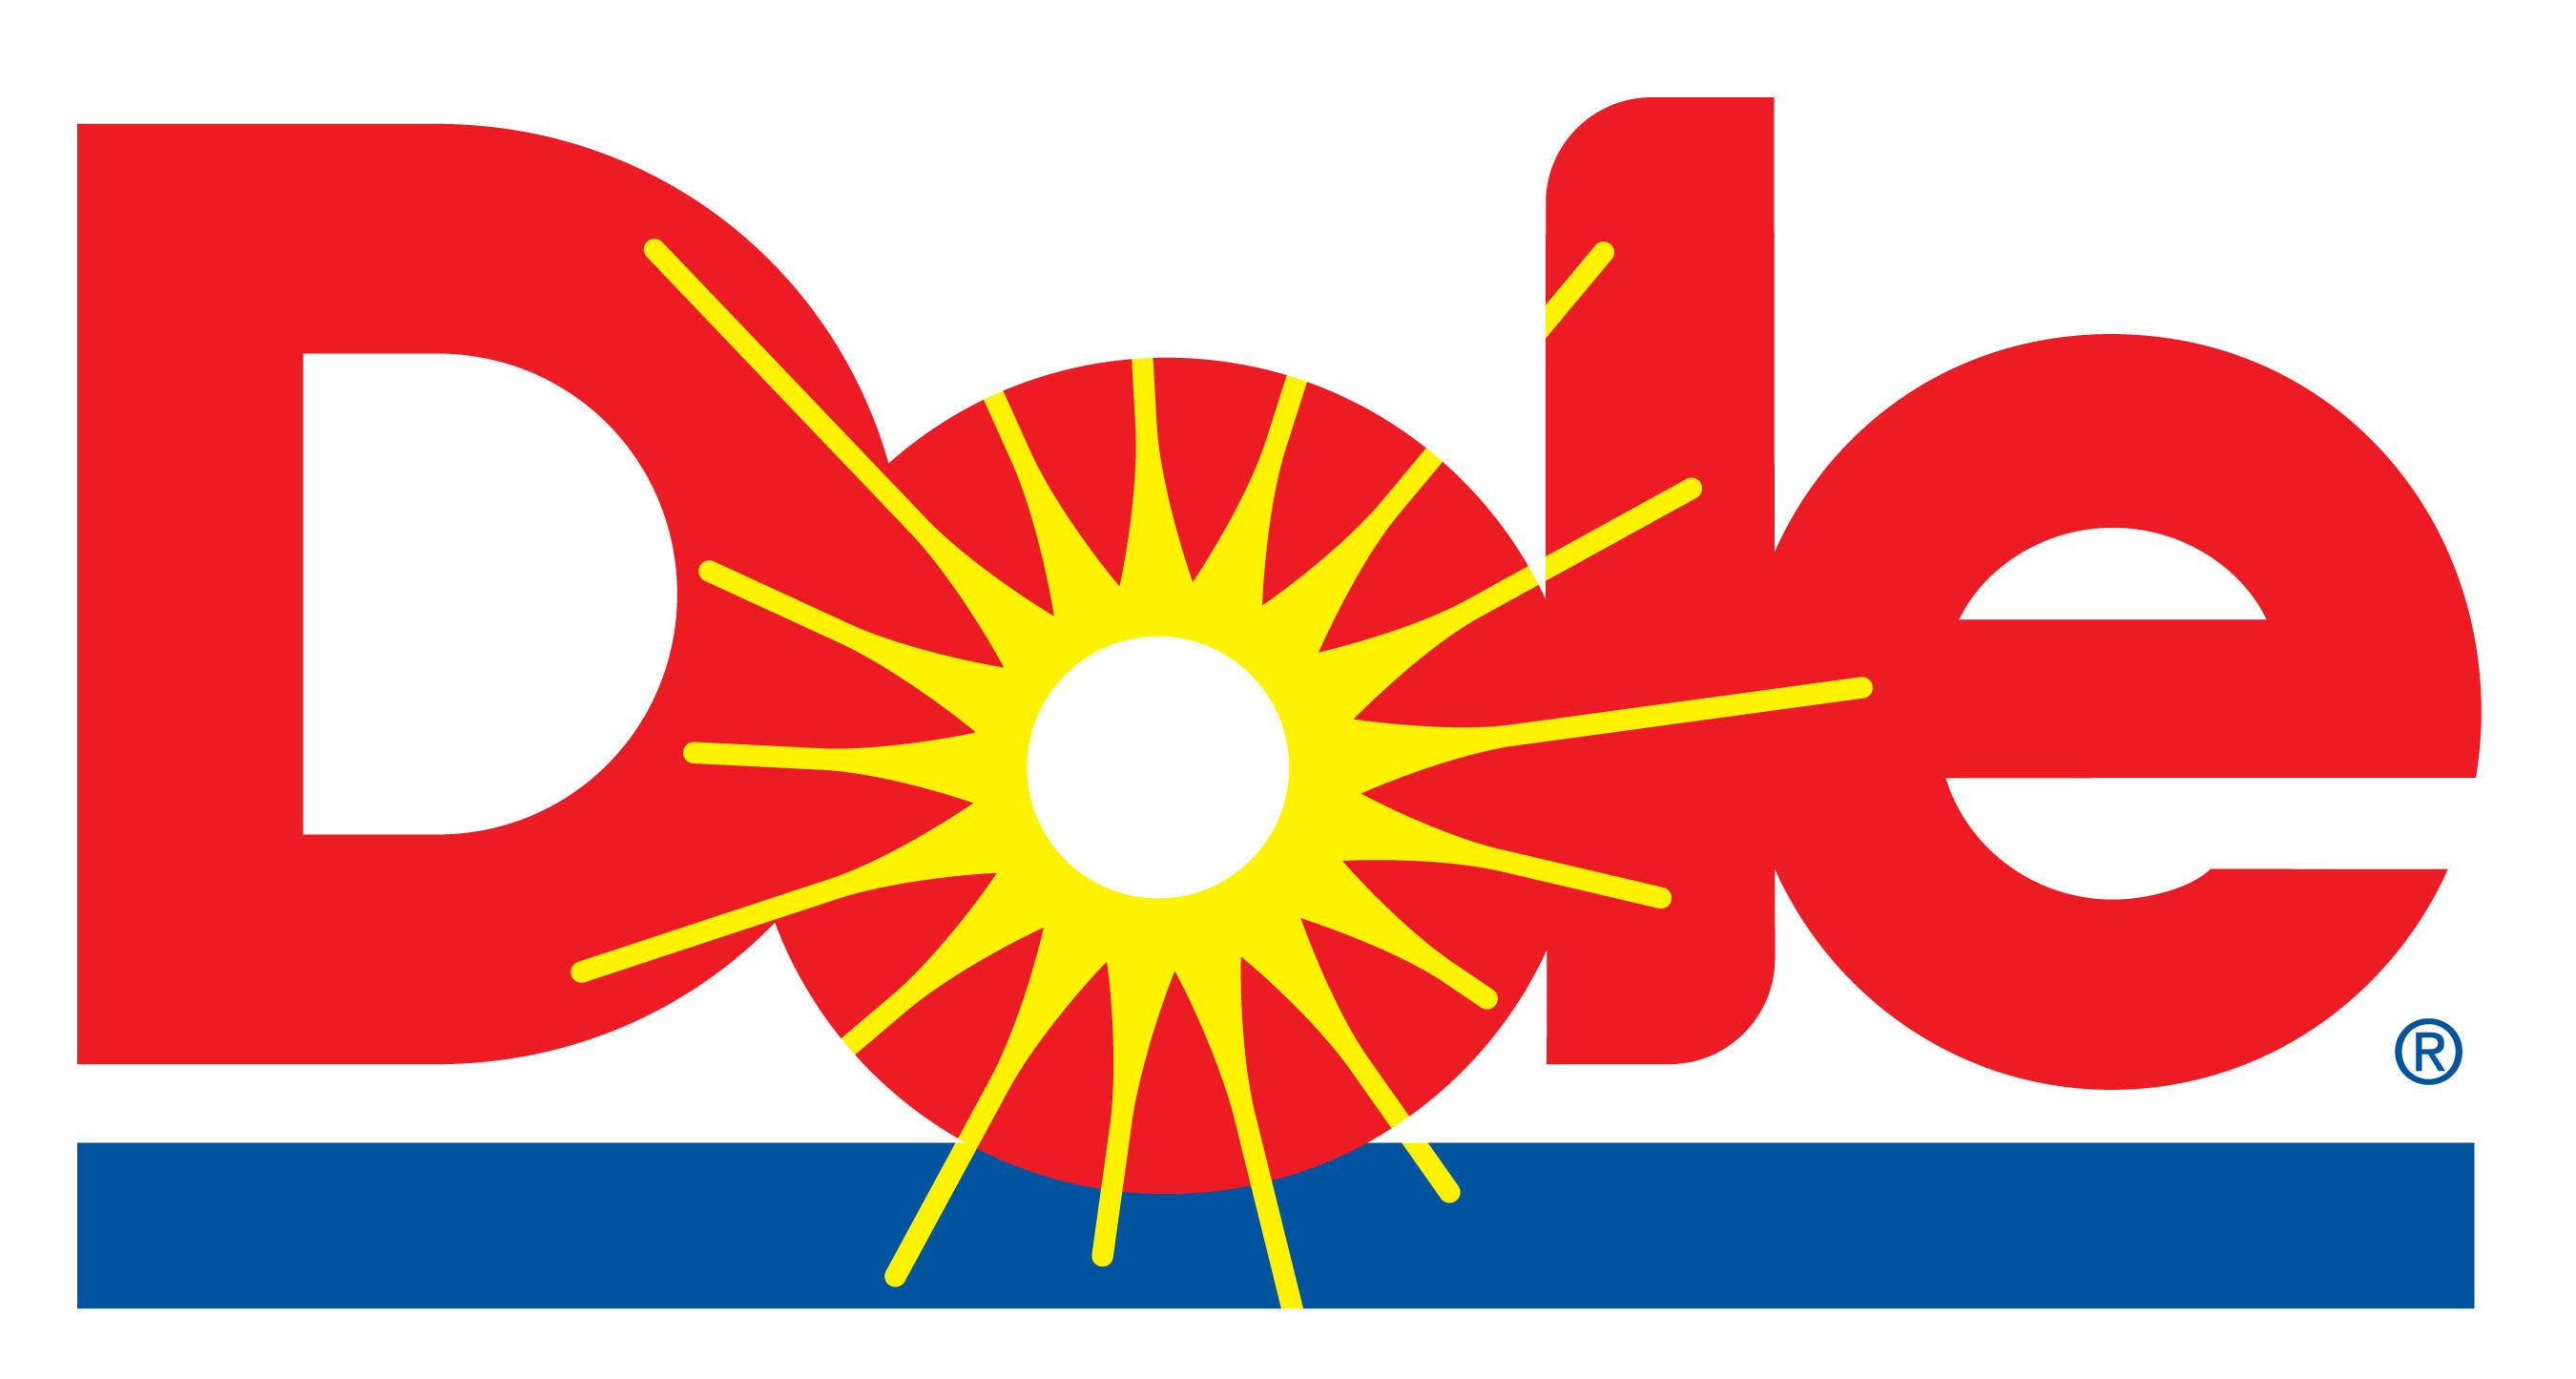 DOLE Logo.  (PRNewsFoto/Dole Food Company, Inc.) THIS CONTENT IS PROVIDED BY PRNewsfoto and is for EDITORIAL USE ONLY**